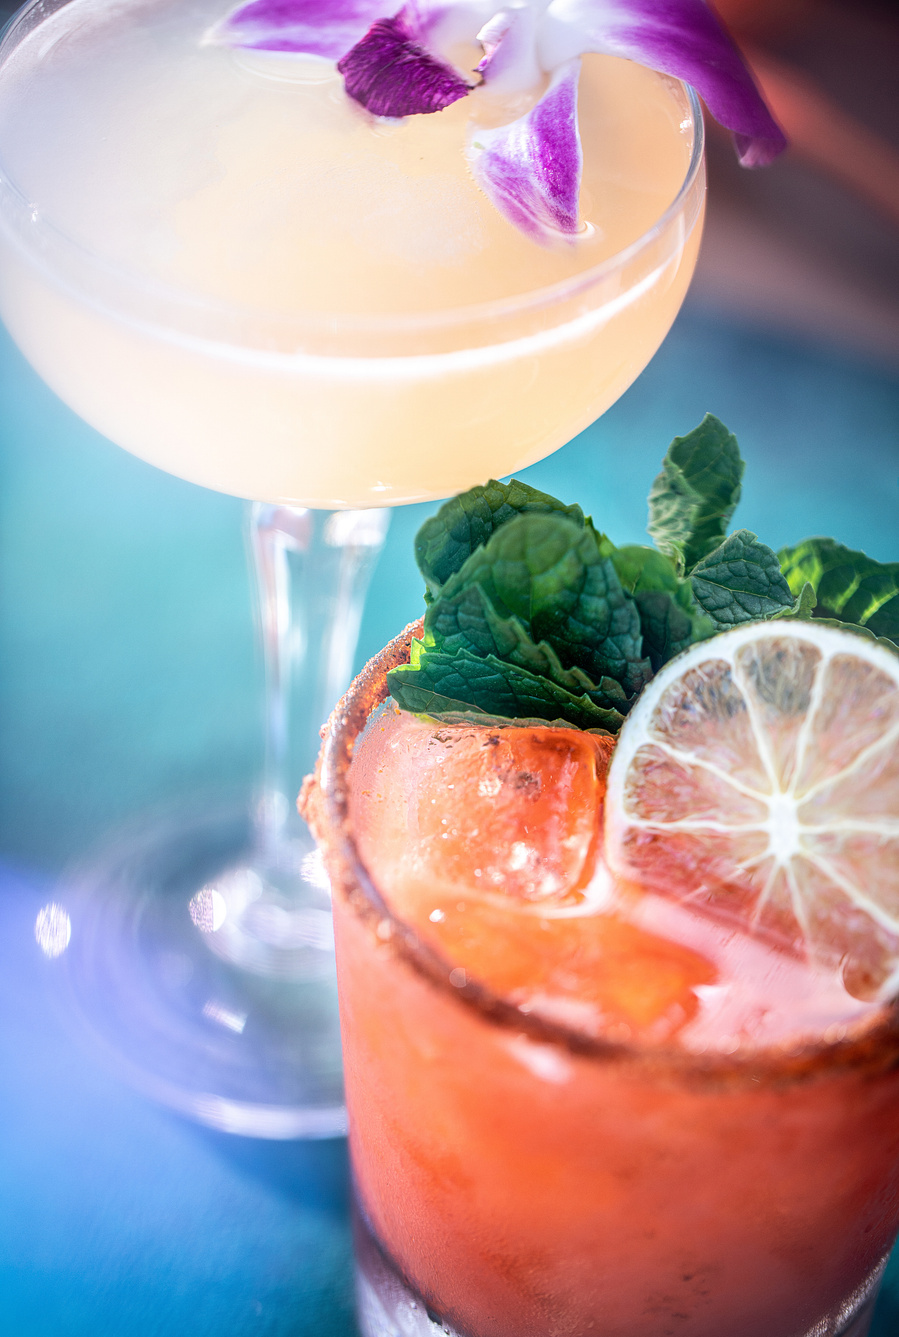 A martini and a bloody mary sitting in the sun on a teal surface that is out of focus. Fruit and flower garnishes with artful light flares. Restaurant drink photography for resort bar menu